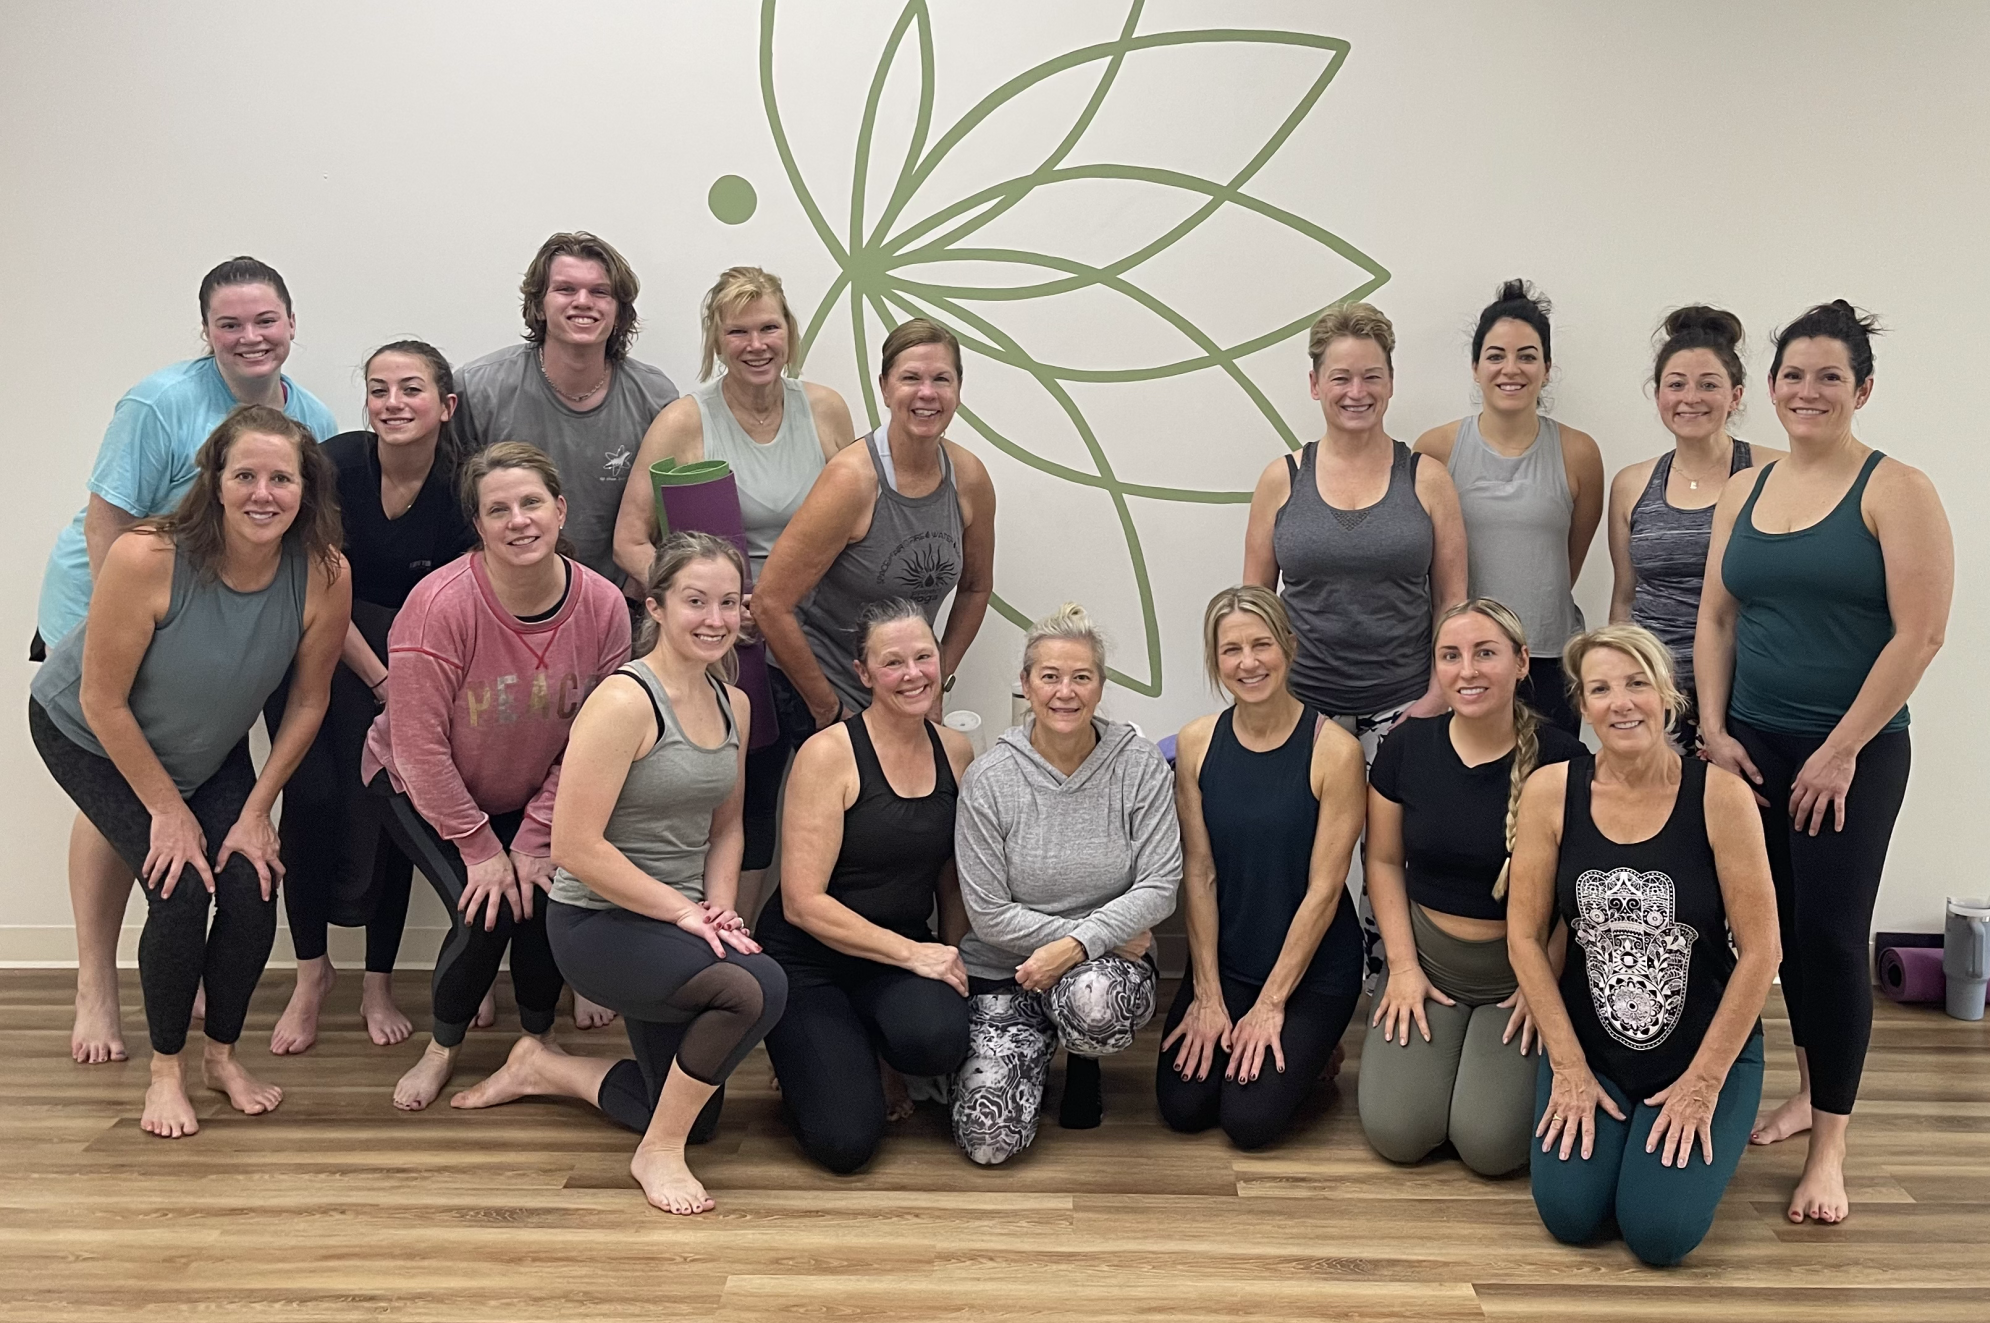 Yoga Nook members pose for a picture after class.